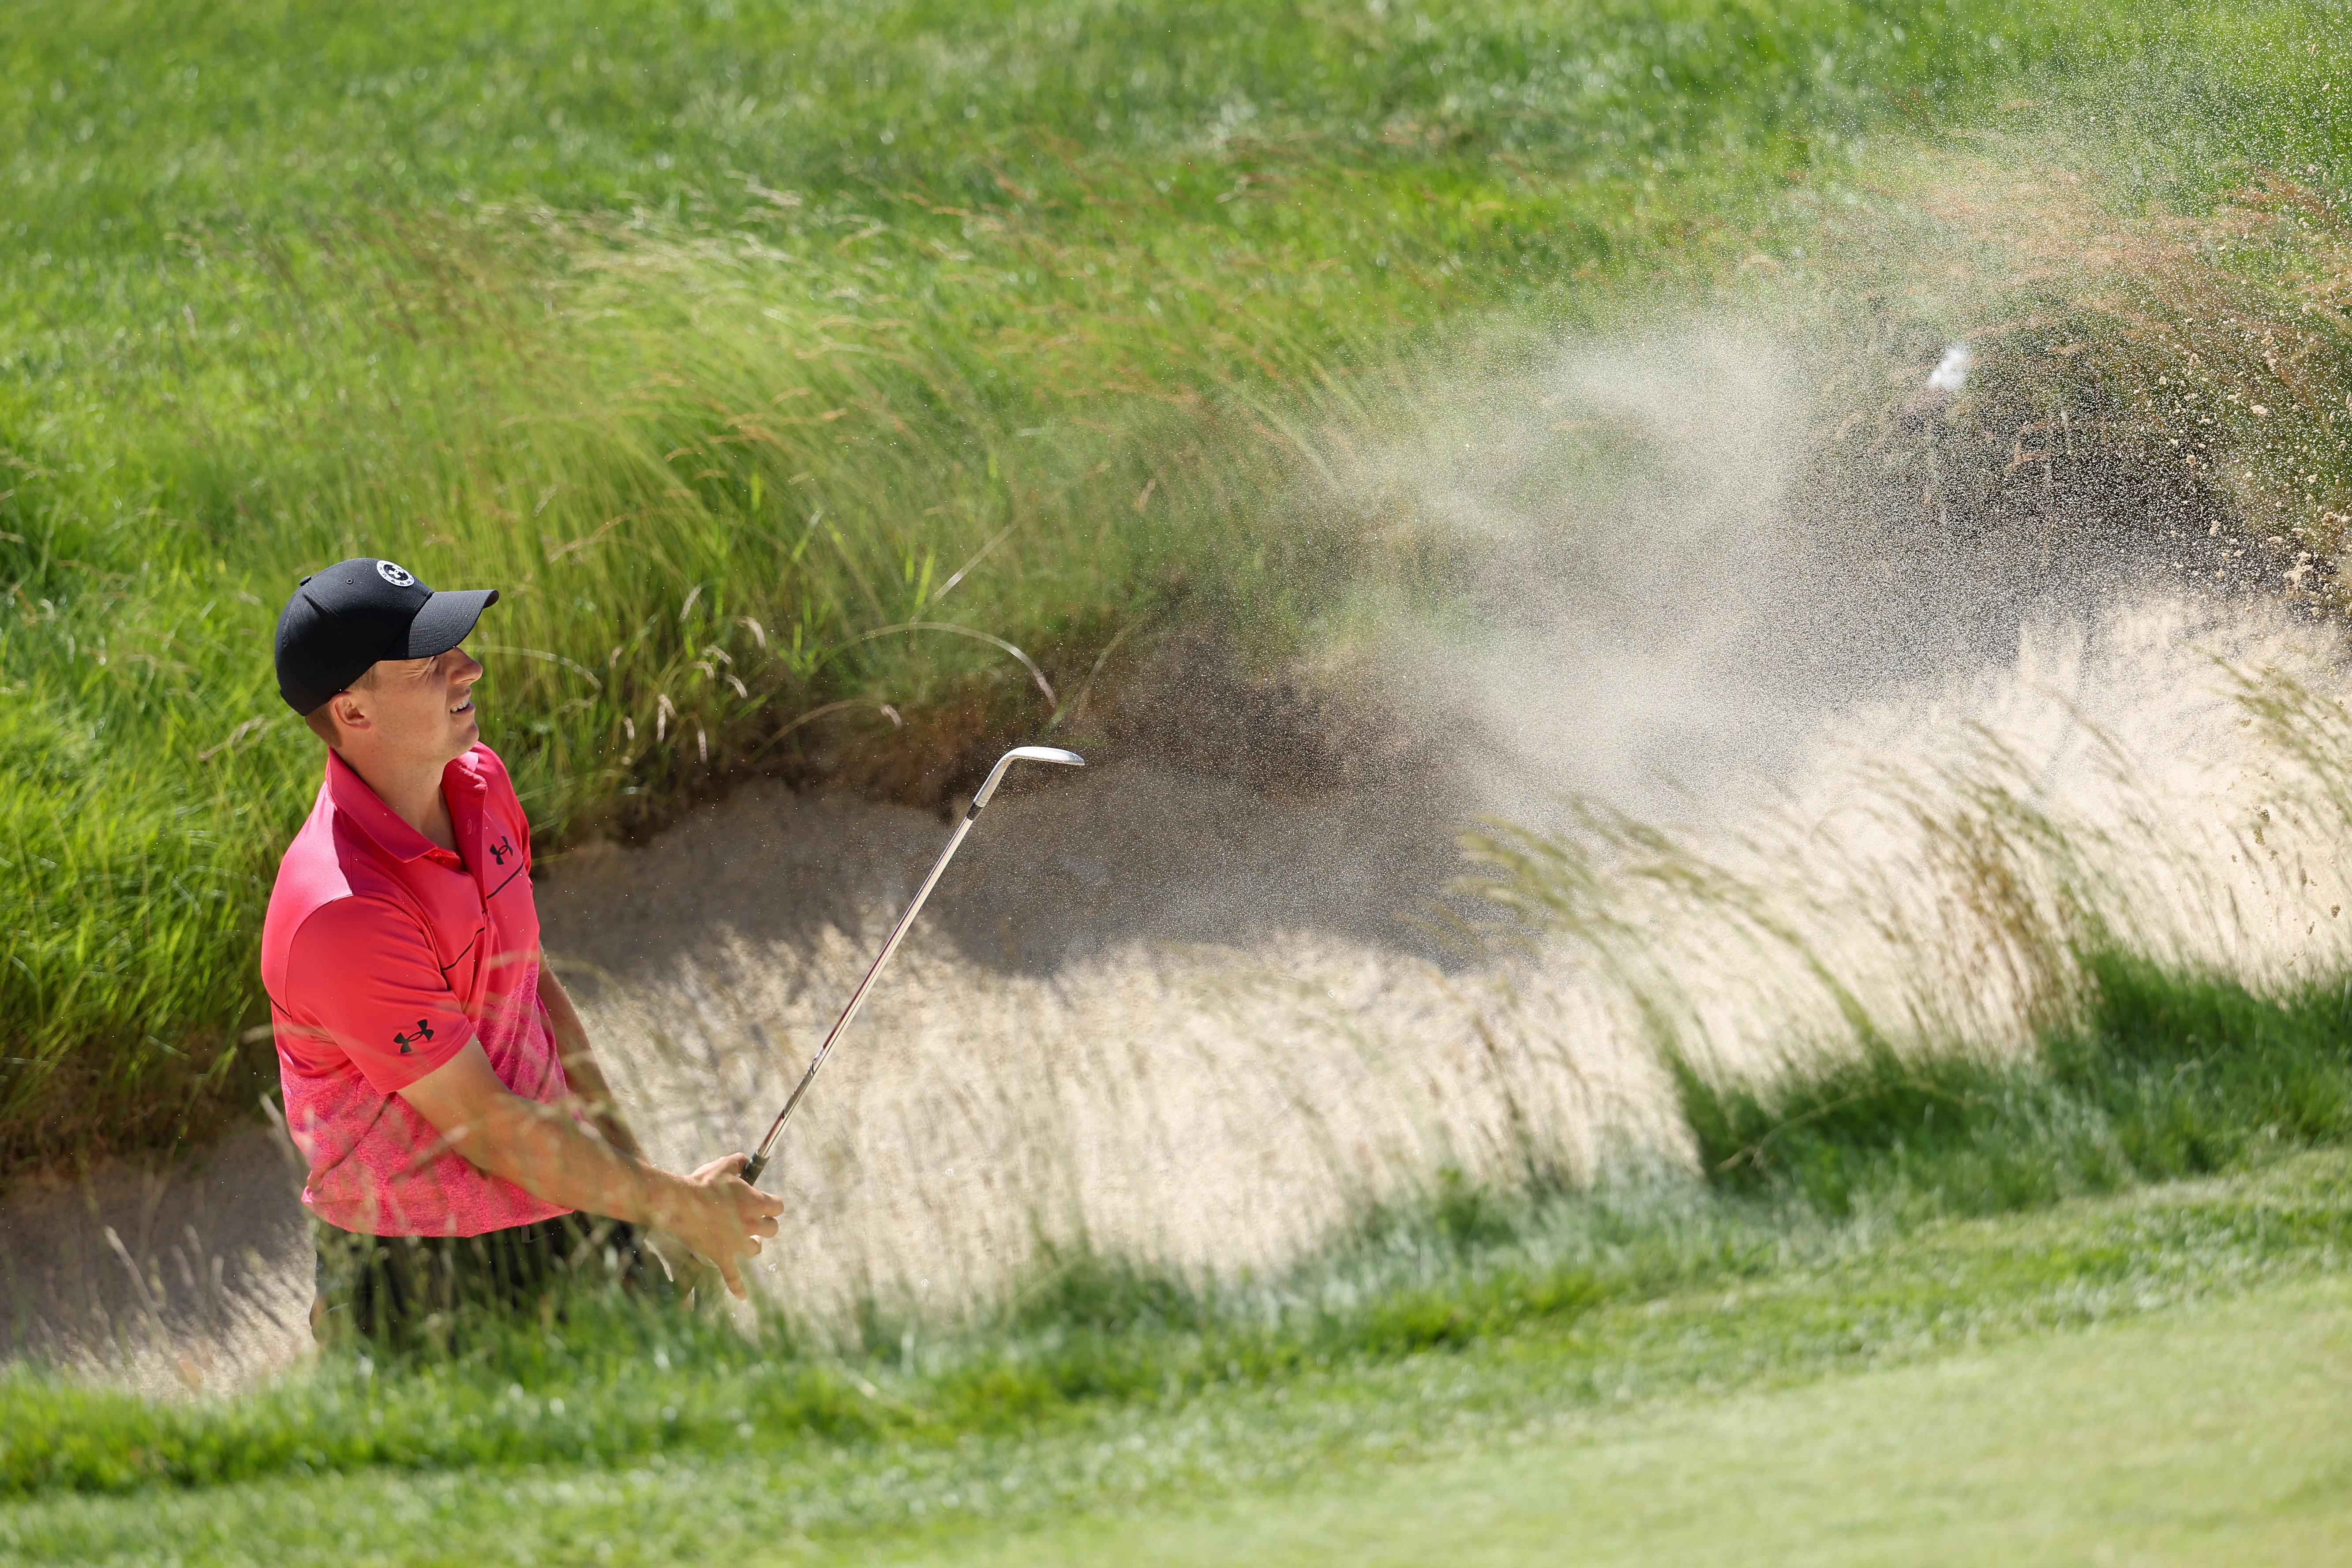 Jordan Spieth of the United States plays from a bunker during a practice round prior to the US Open at The Country Club on June 14, 2022 in Brookline, Massachusetts.